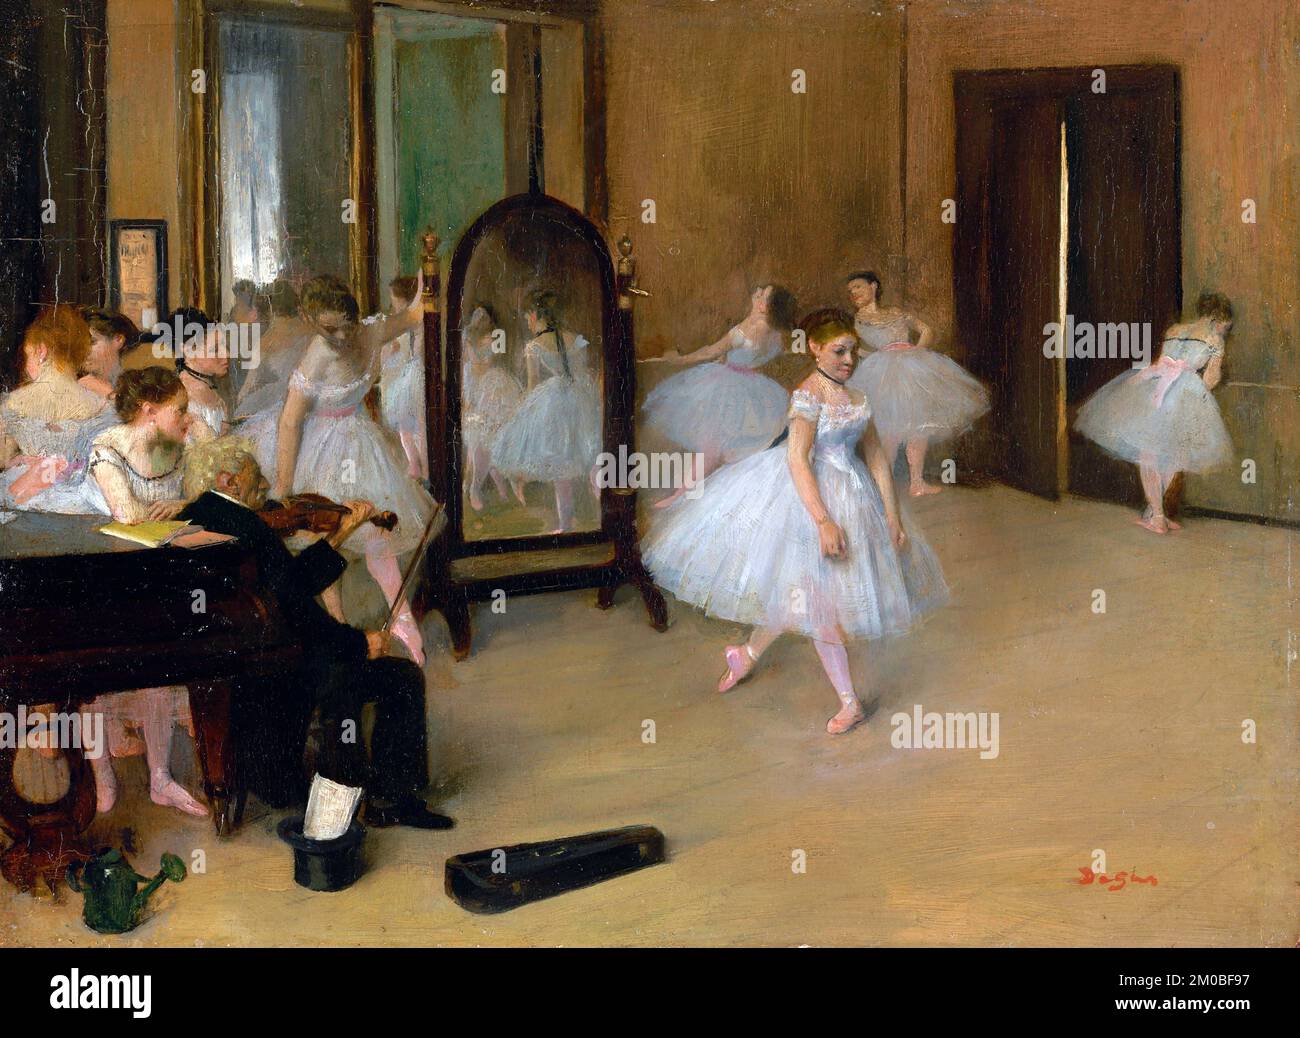 Degas. Painting entitled "The Dancing Class" by Edgar Degas (1834-1917), oil on panel, c. 1870 Stock Photo